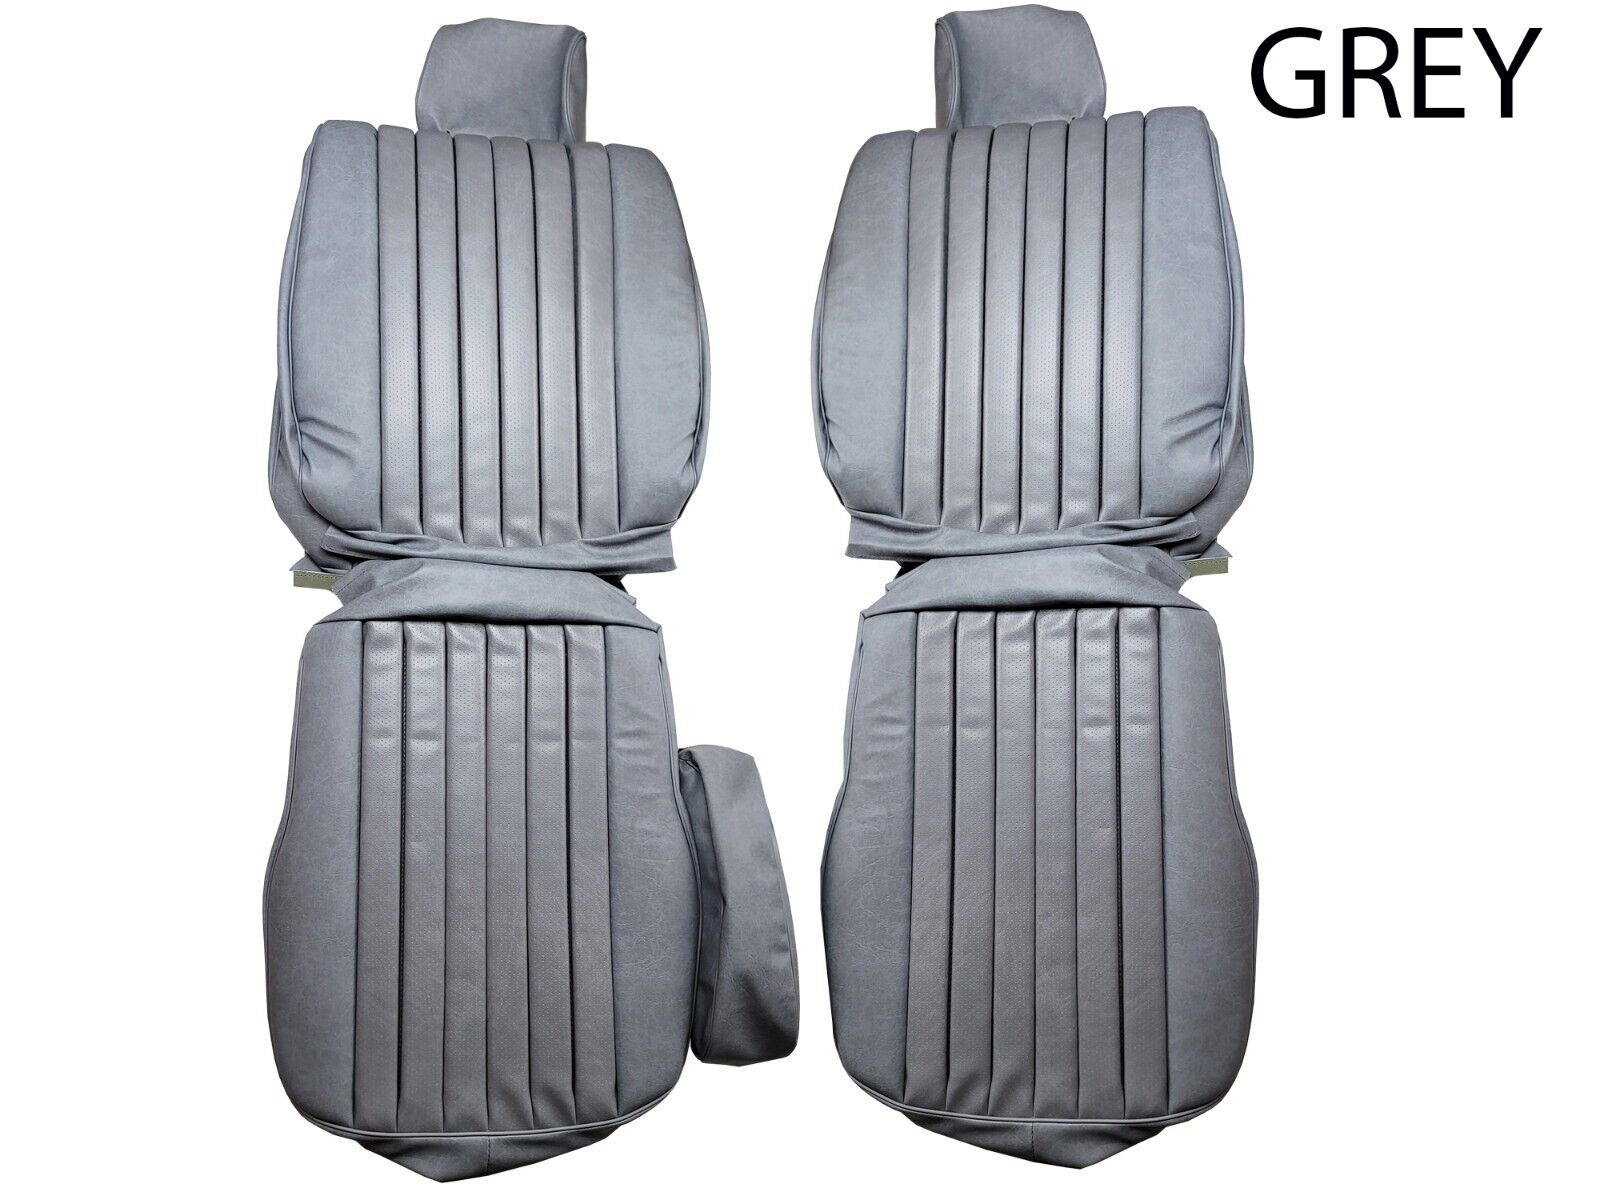 FITS Mercedes Benz R107 1980-85 380SL GREY Leather Seat Covers